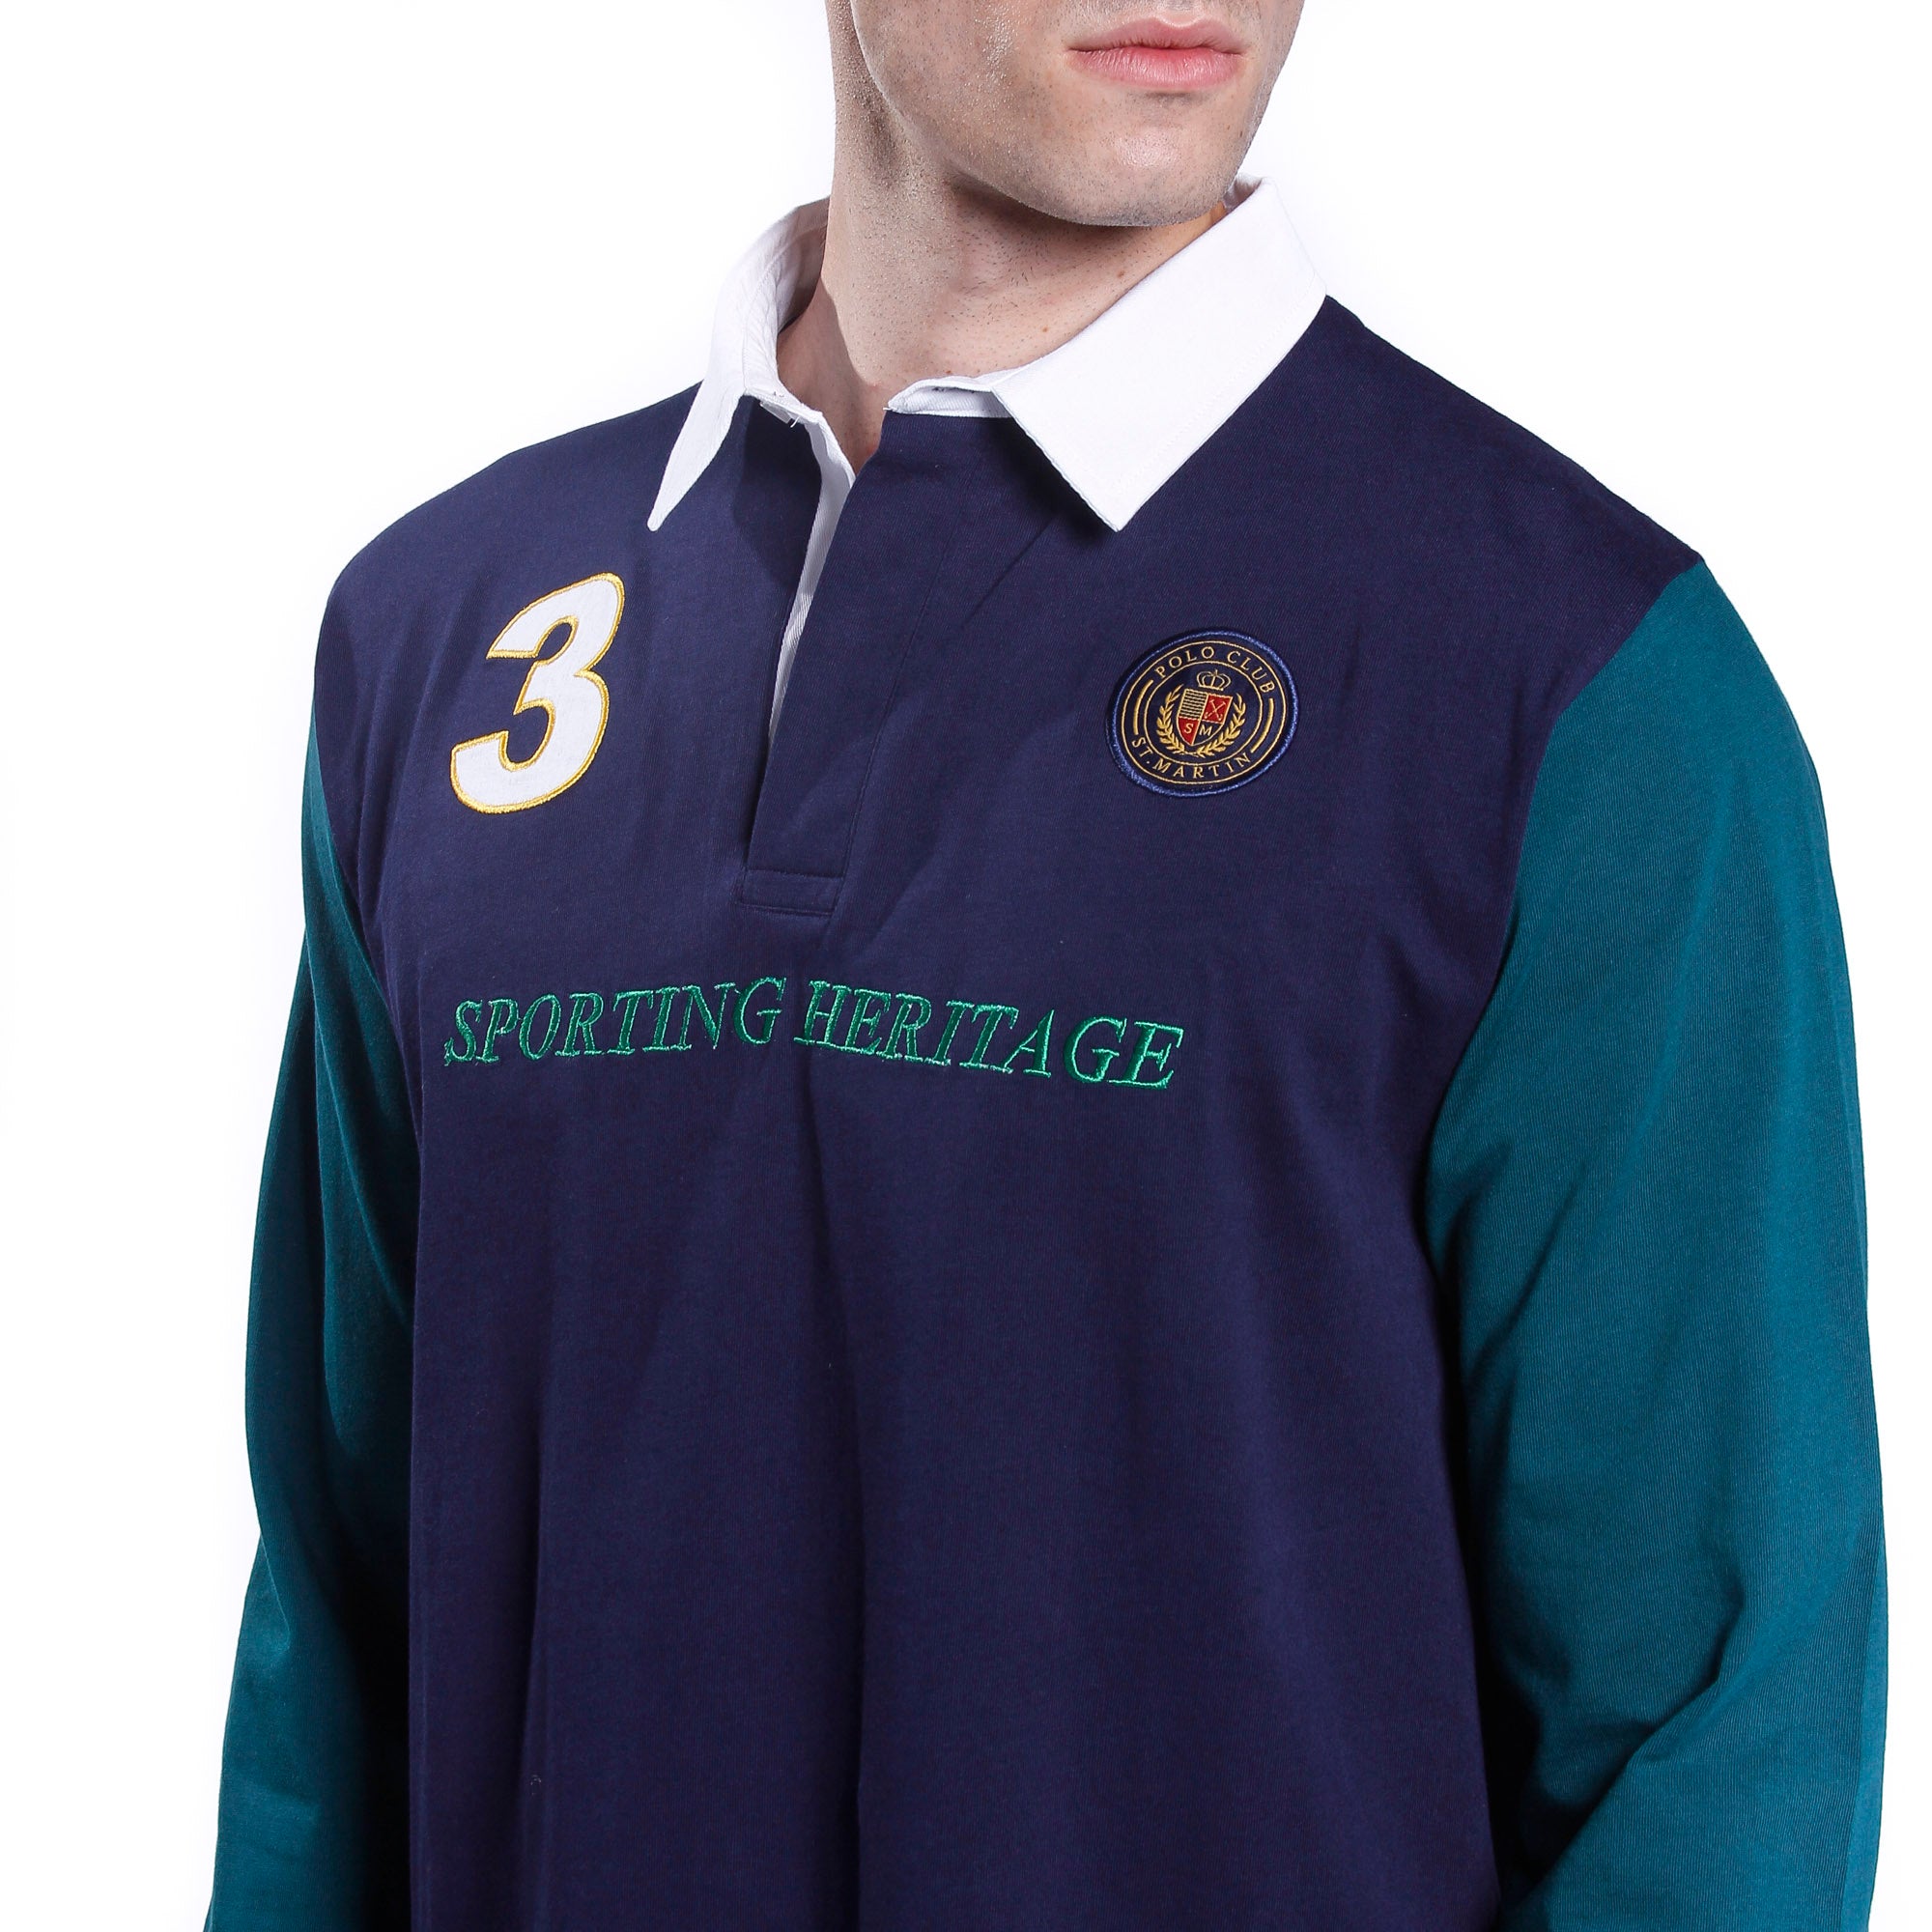 Jersey polo shirt with contrasting sleeves